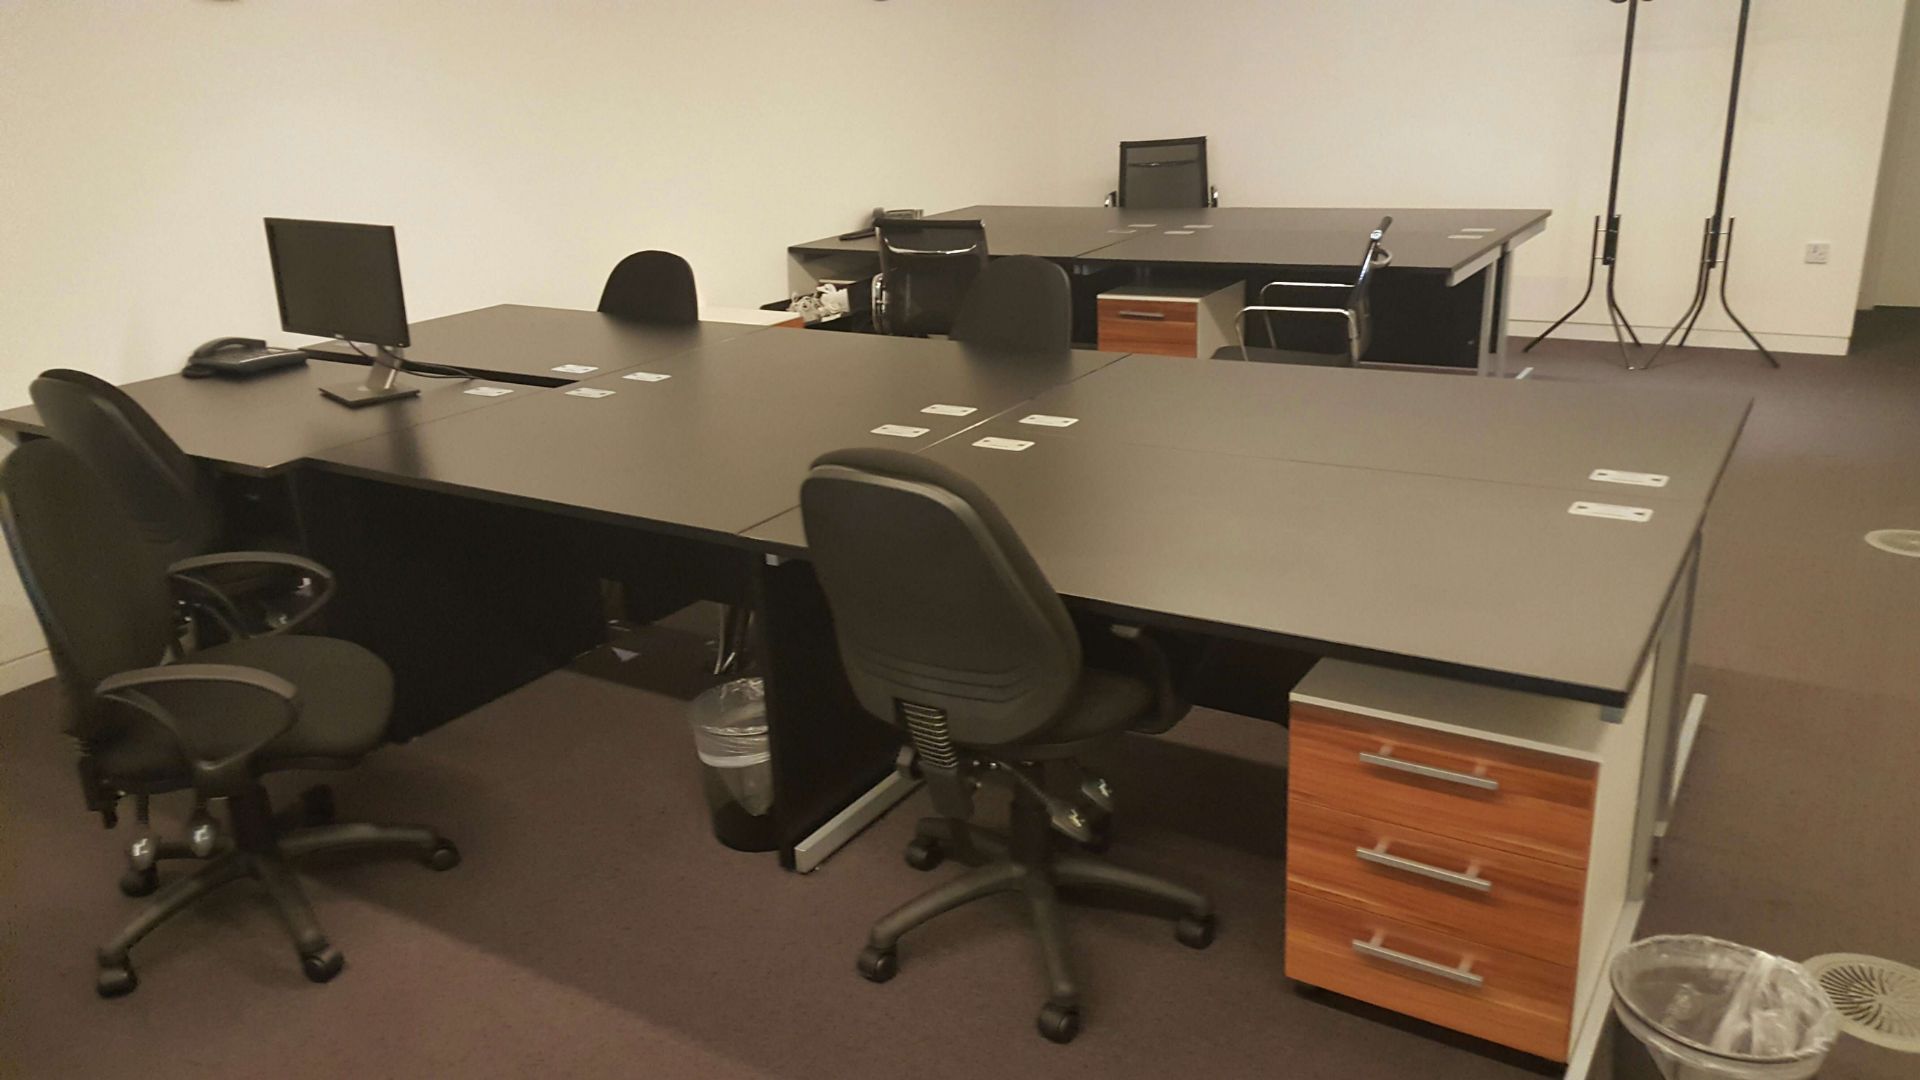 Lee and Plumpton Black Top Office Desk with Silver Framework - Image 2 of 4